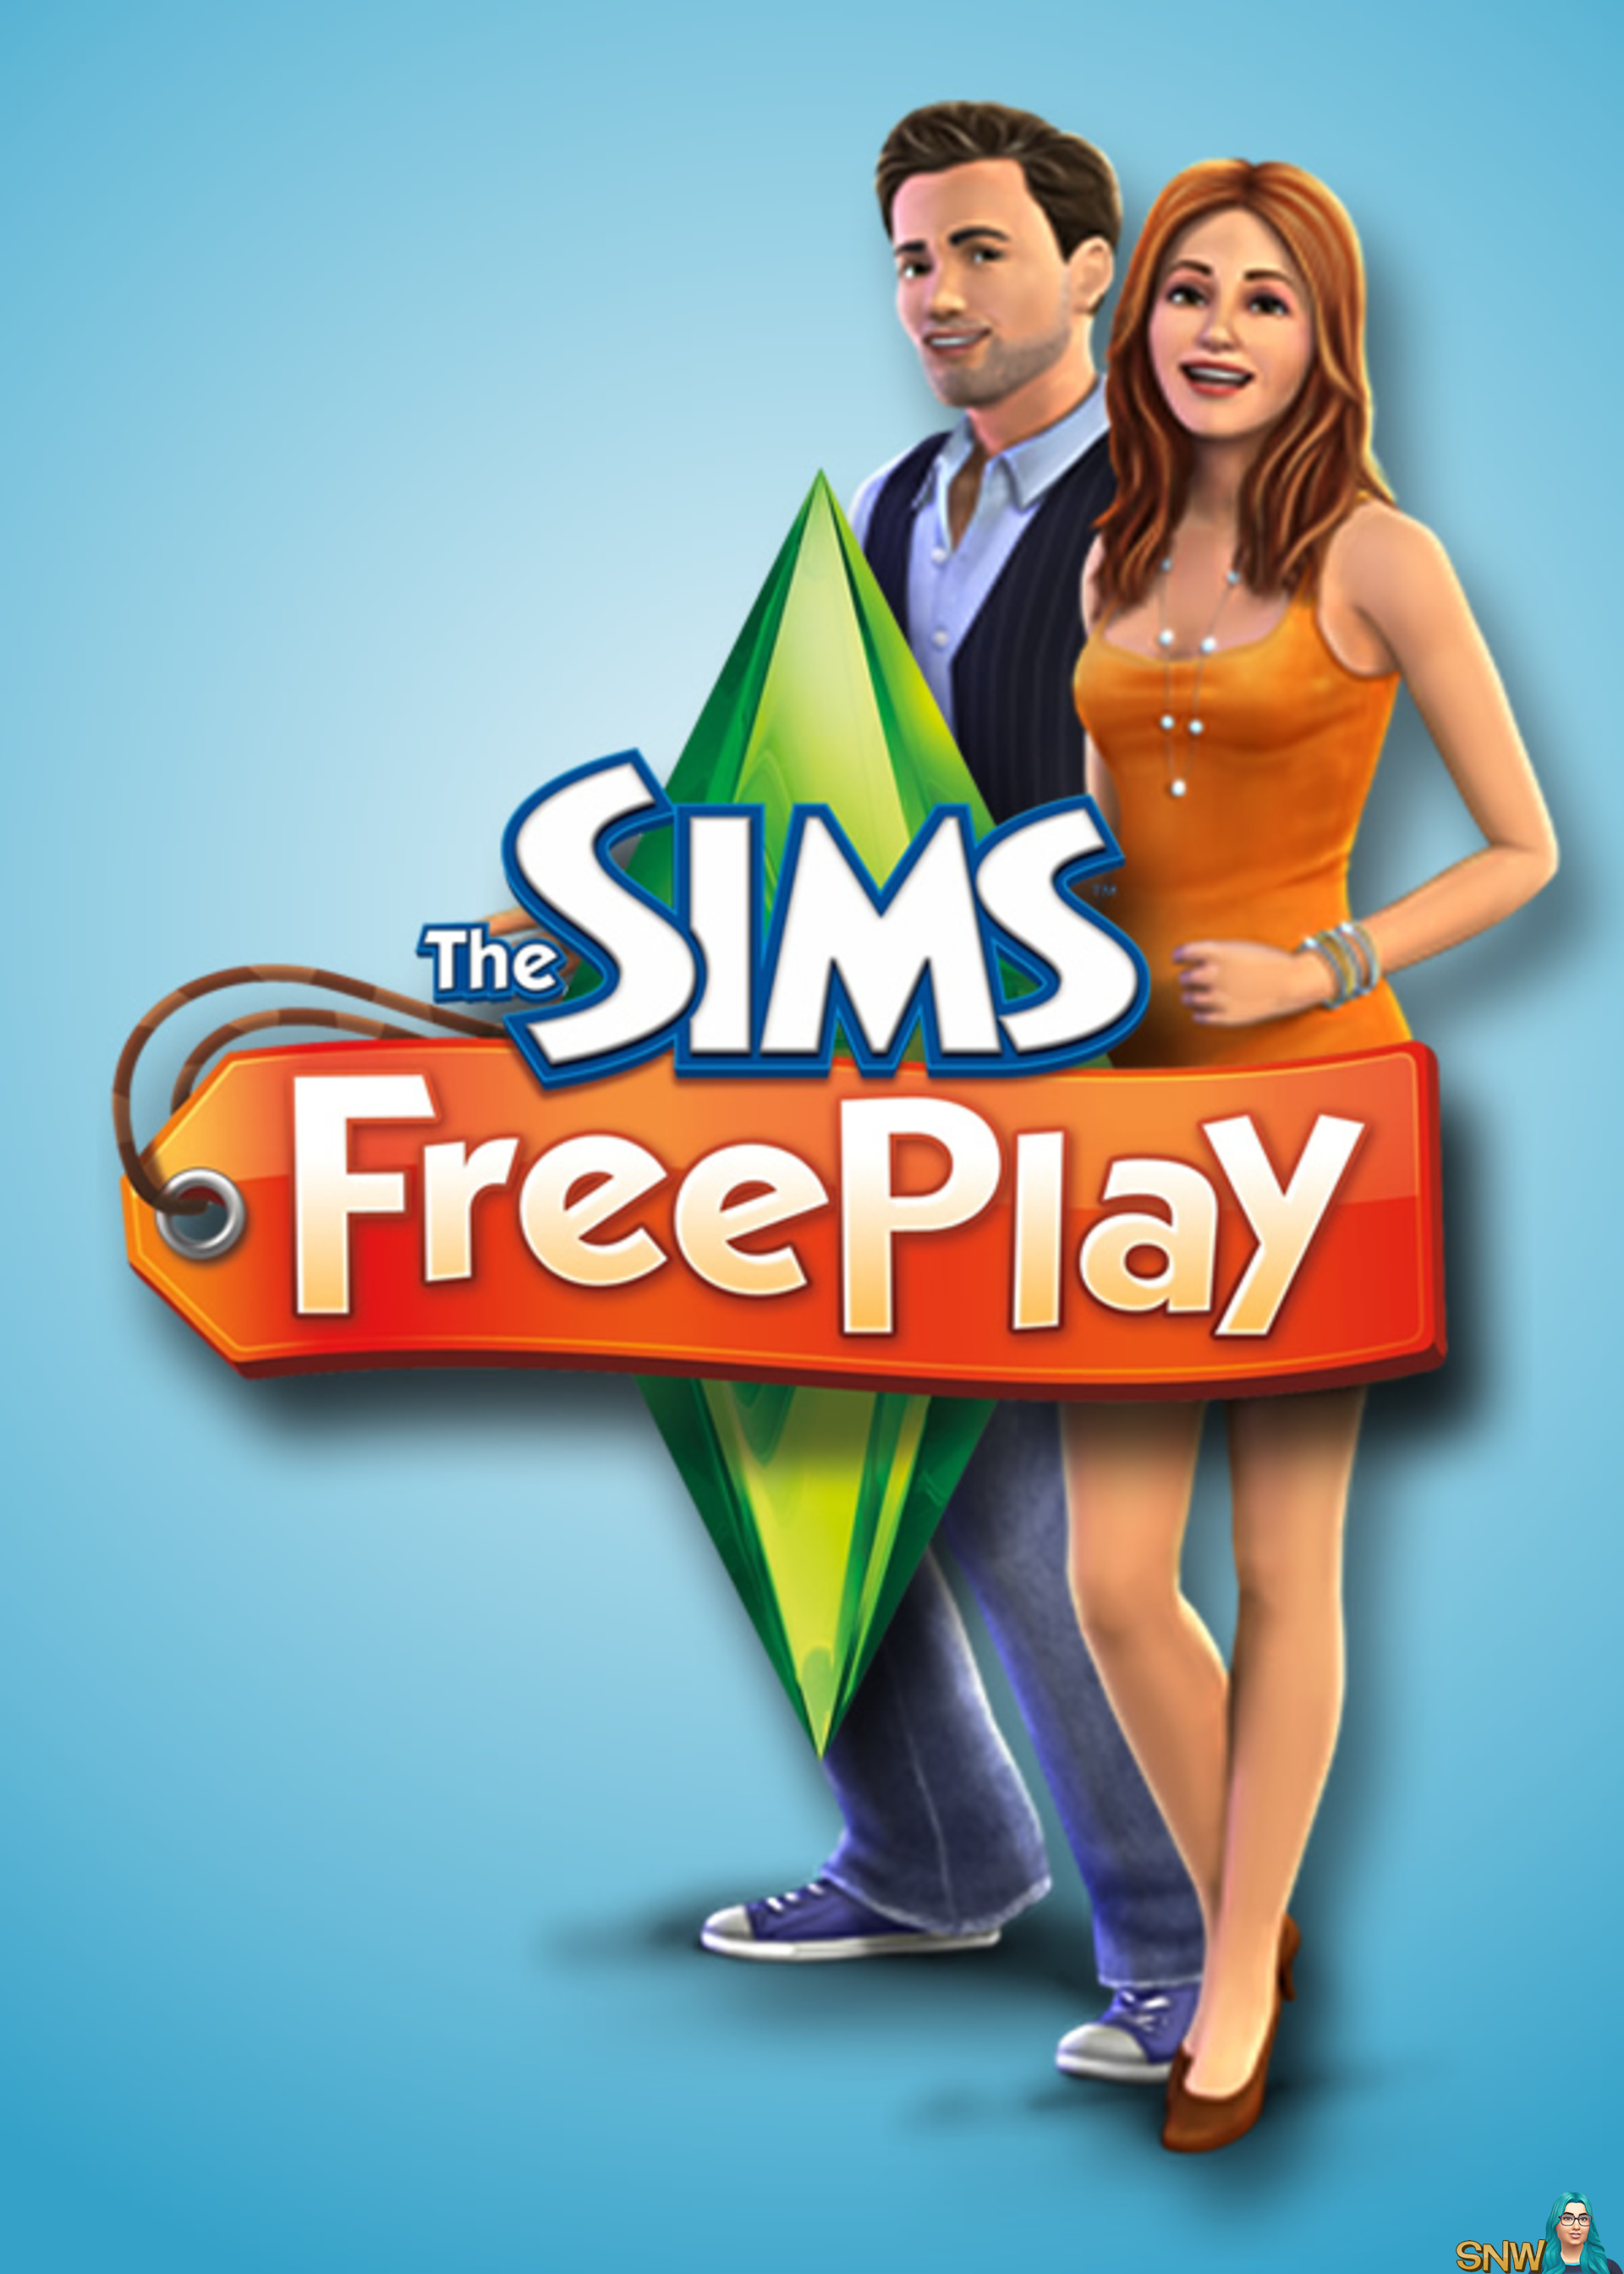 The Sims FreePlay, SNW